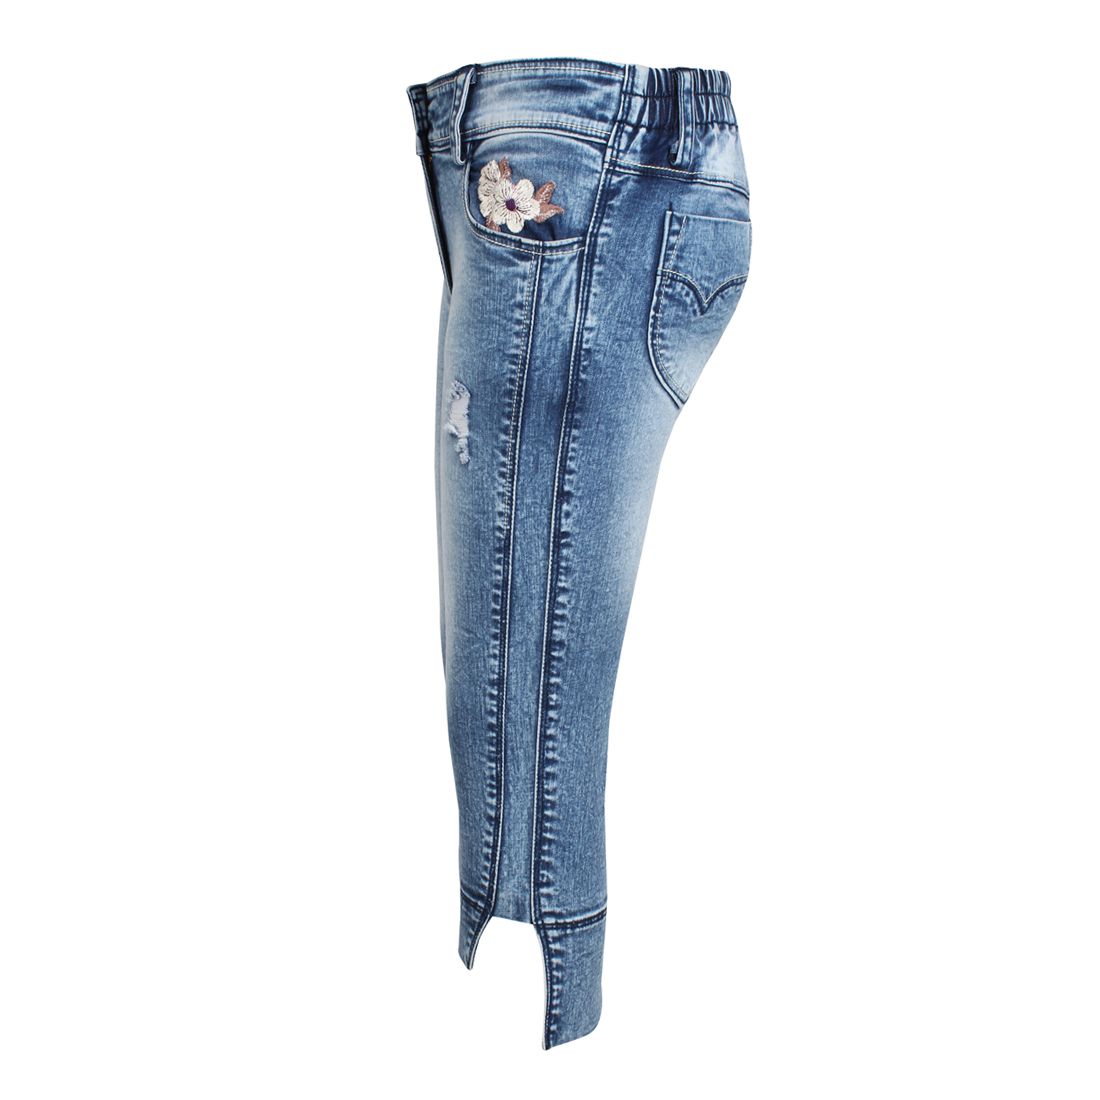 Party Wear Jeans For Girl Shop, 53% OFF ...